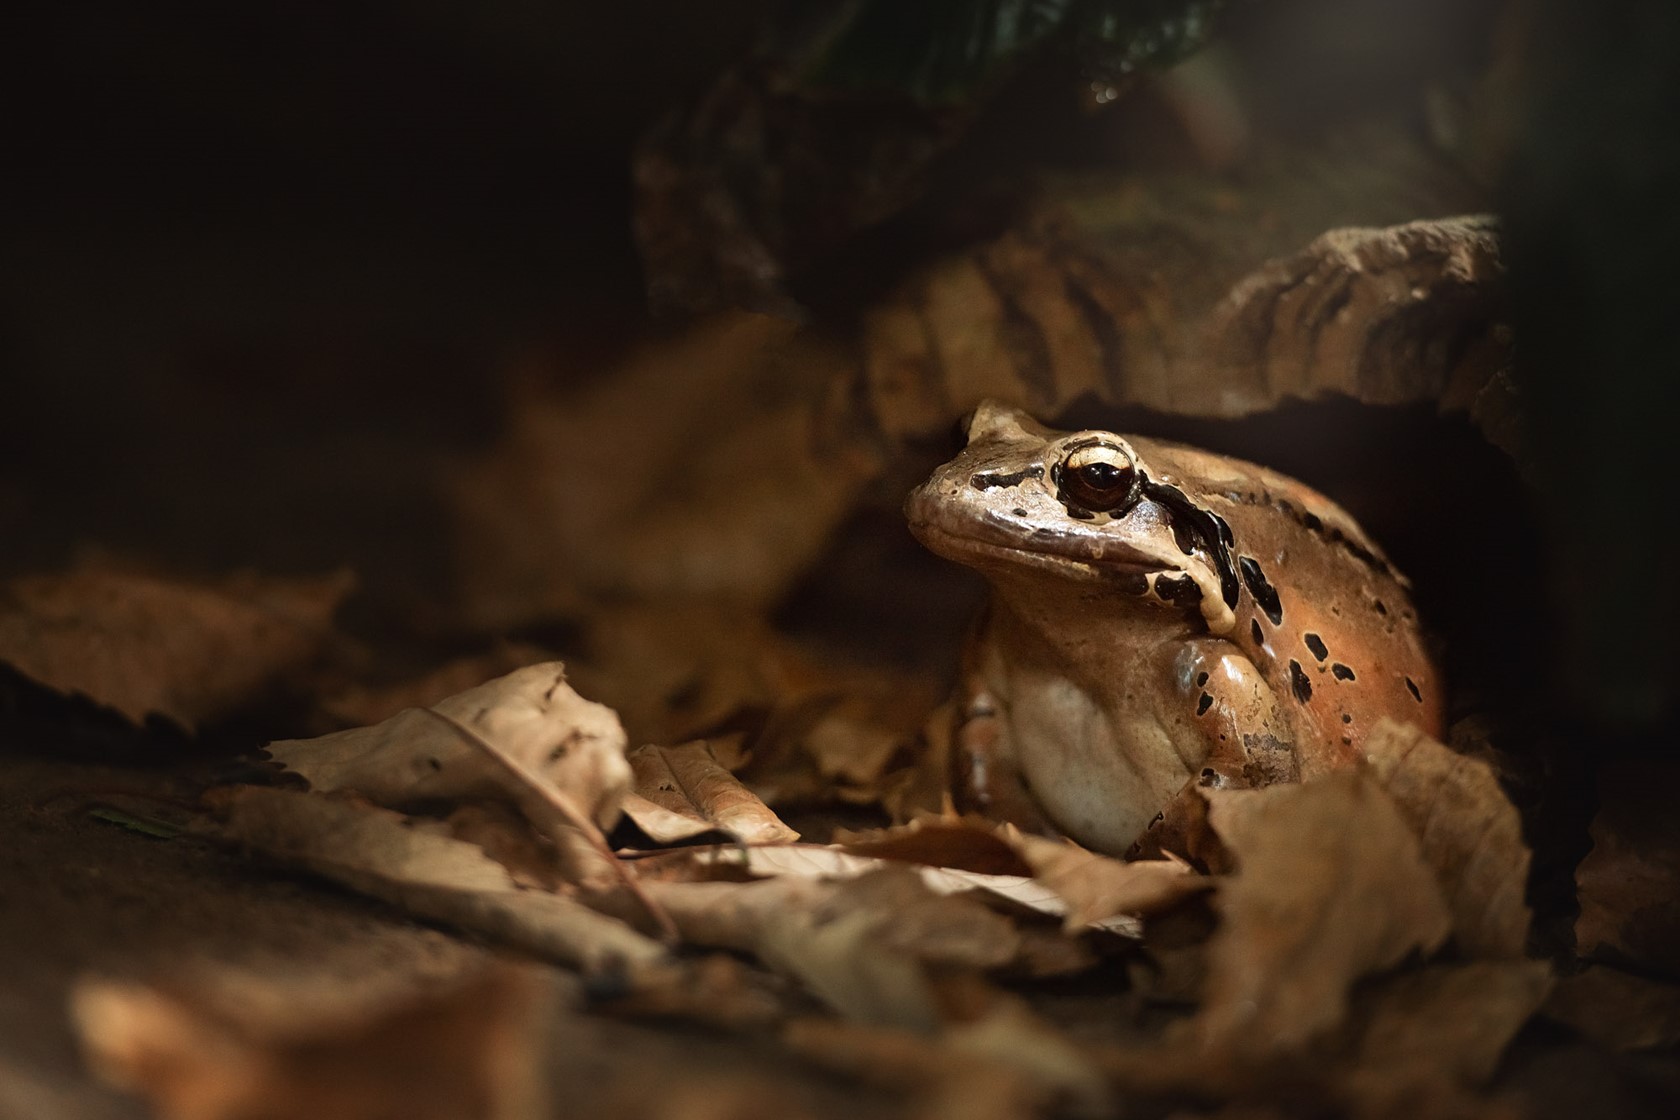 Mountain chicken frog at Jersey Zoo